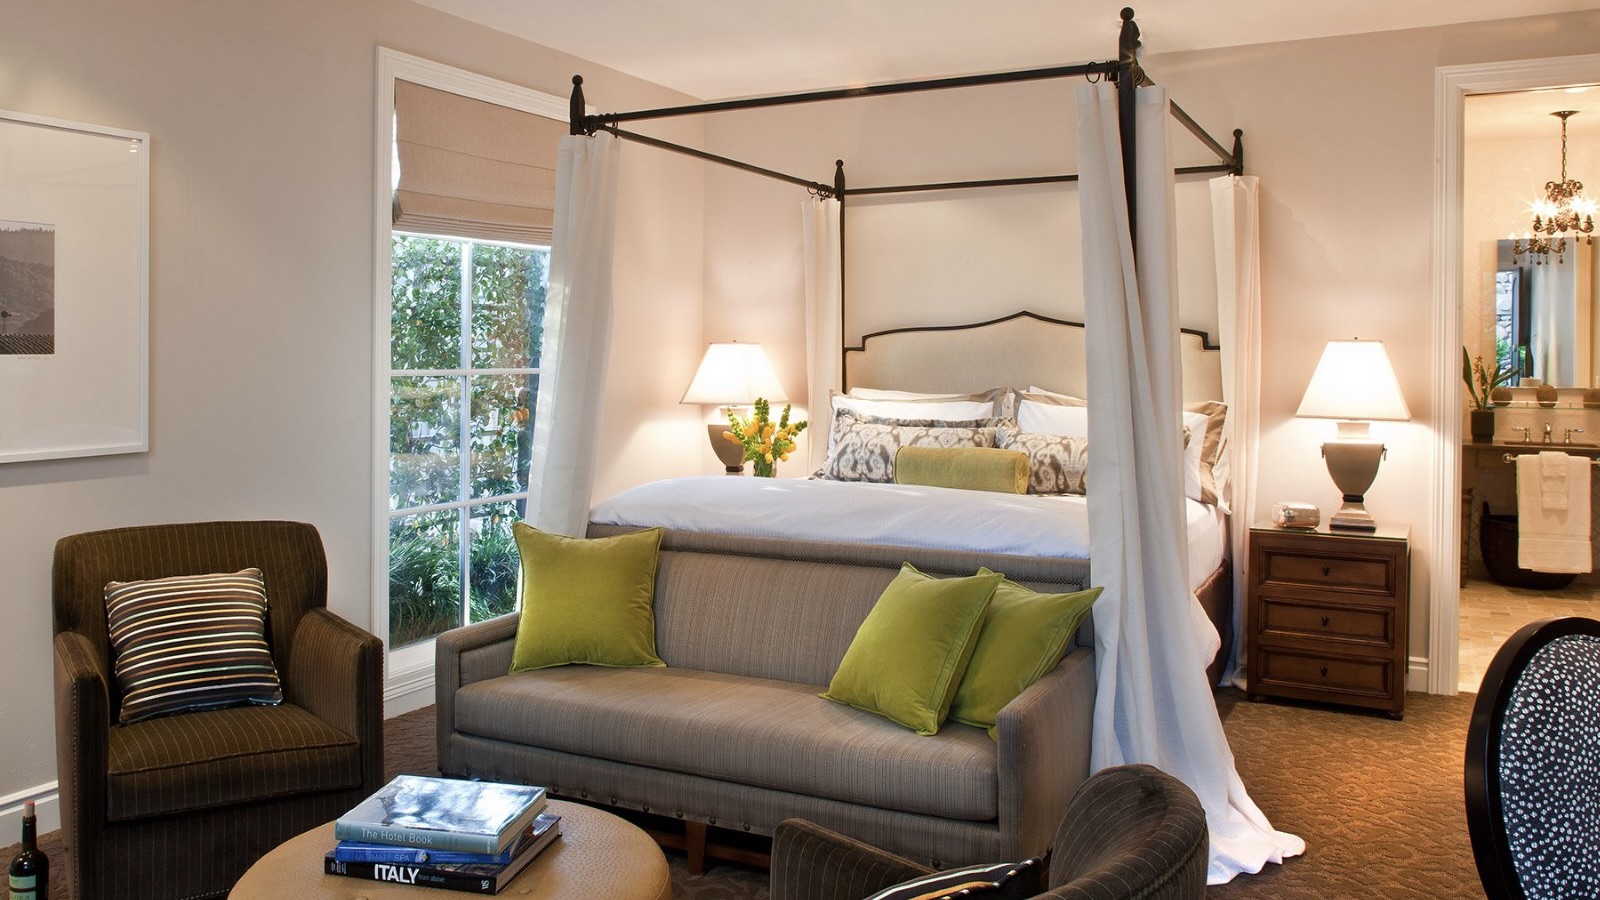 Hotel Yountville luxury king room at one of the best luxury hhotels in Napa Valley, CA